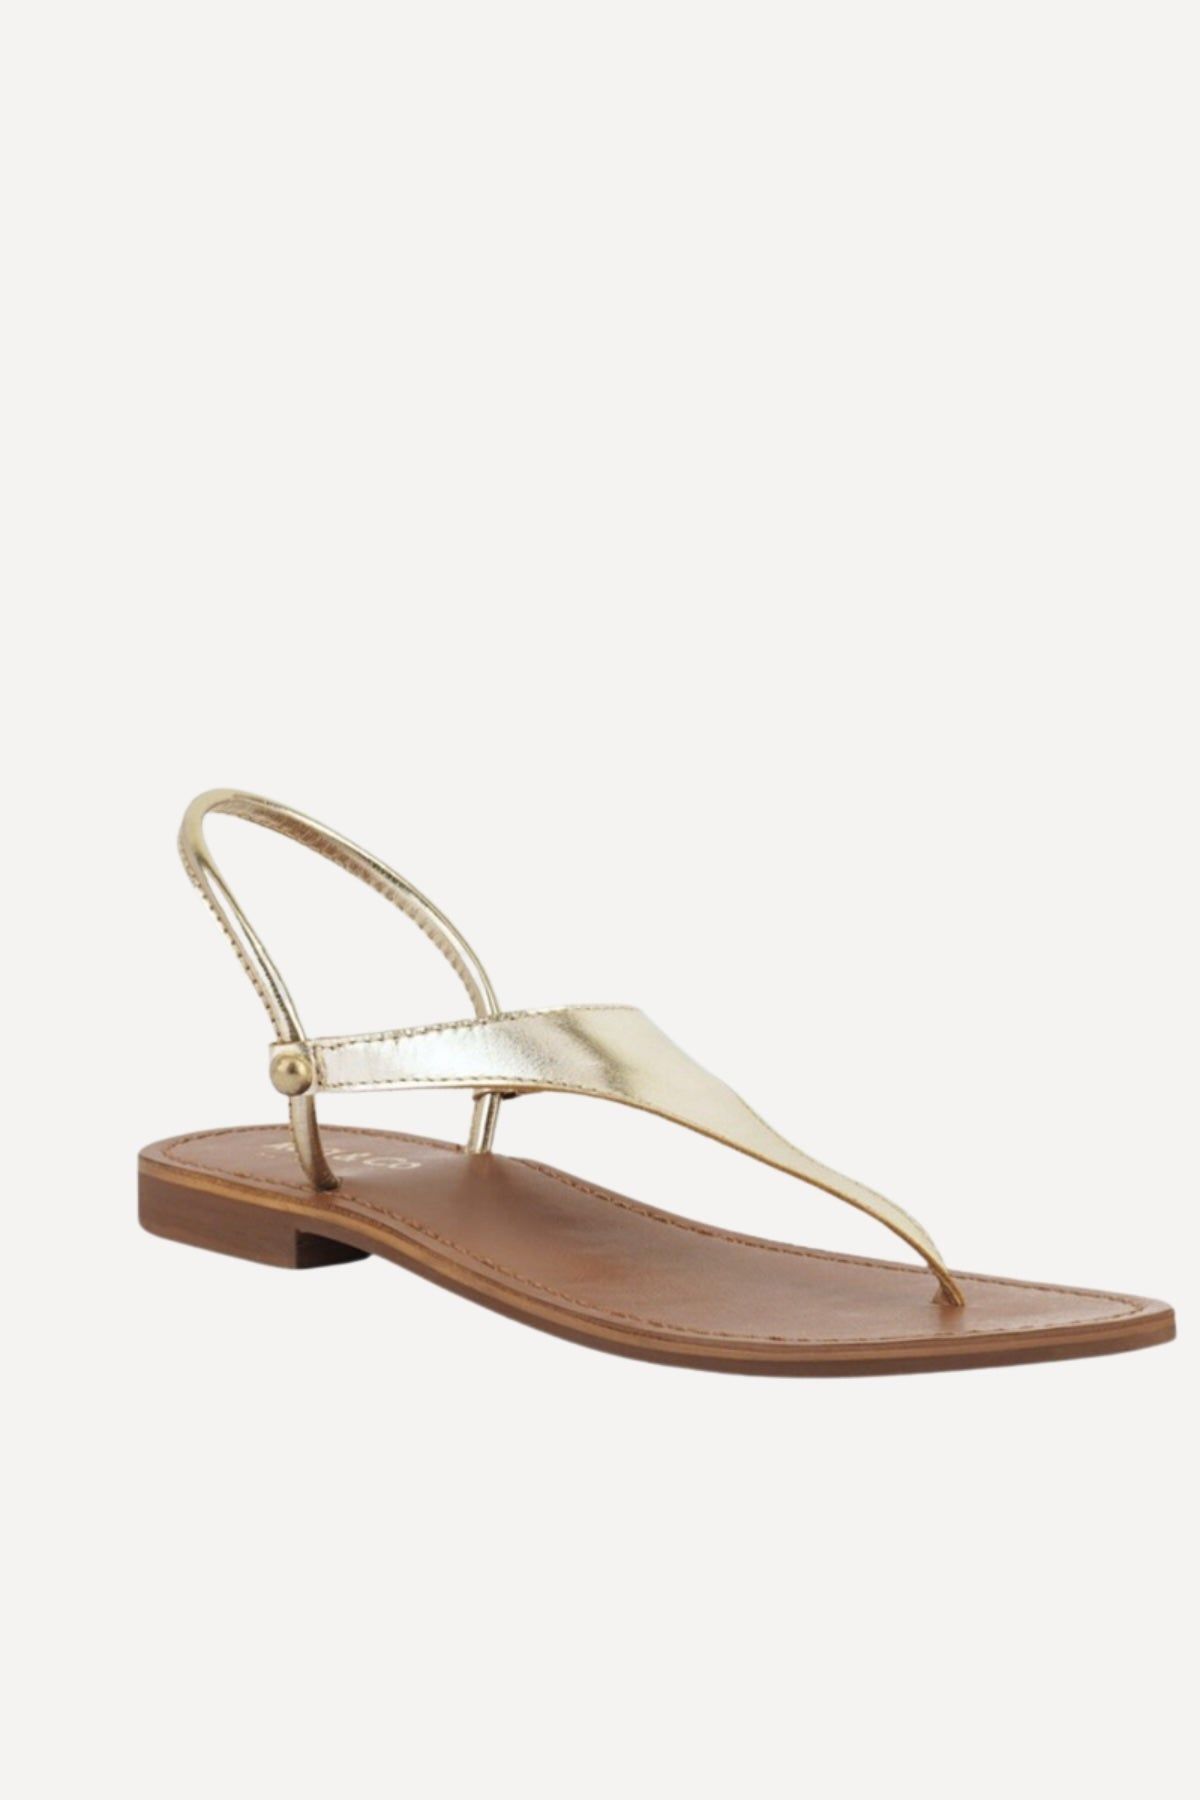 Leather Flat Thong Sandals - LK’s Boutique